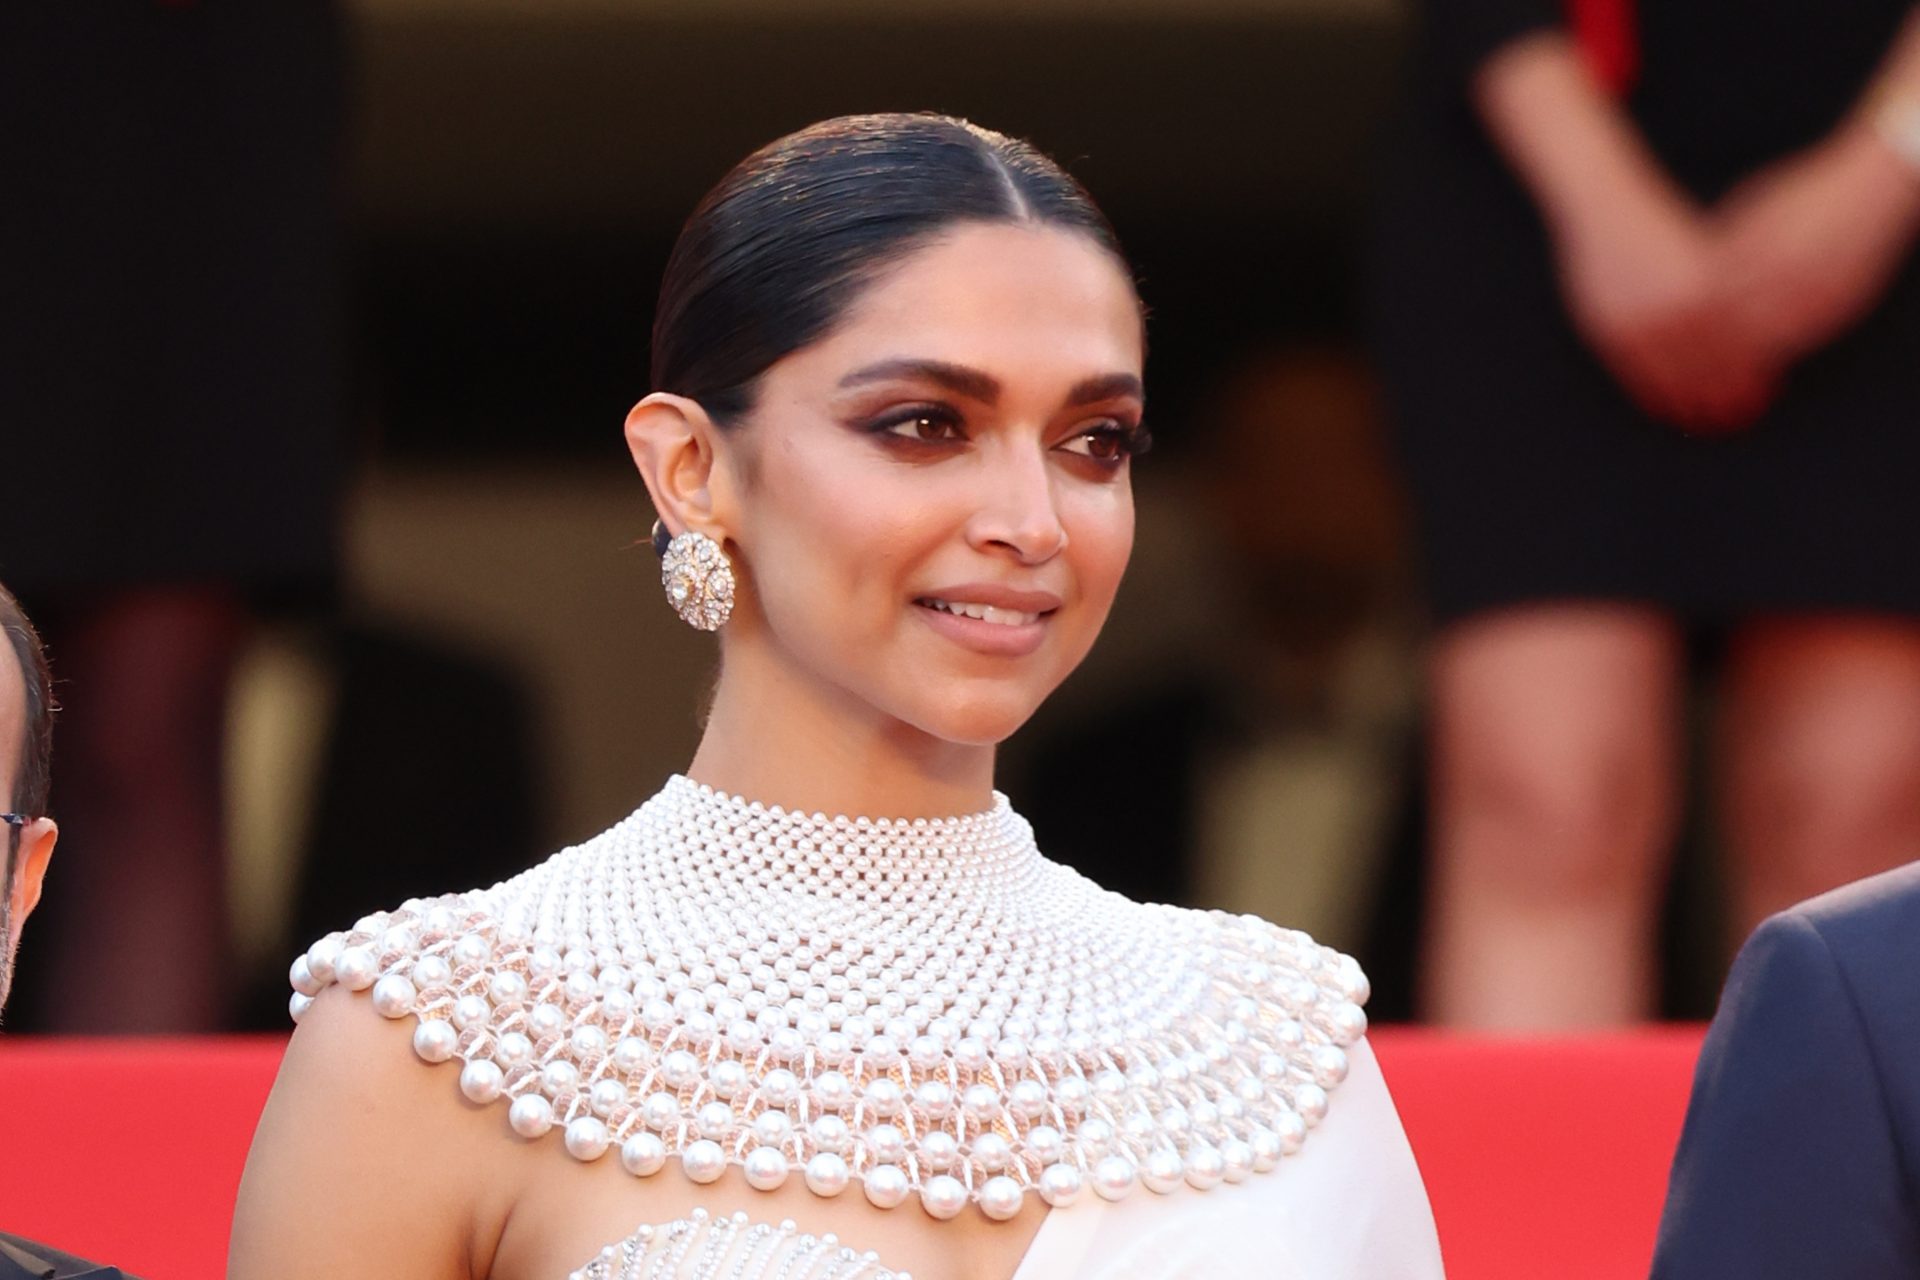 Let's take a look at Deepika Padukone's net worth and all the shiny thing  she owns